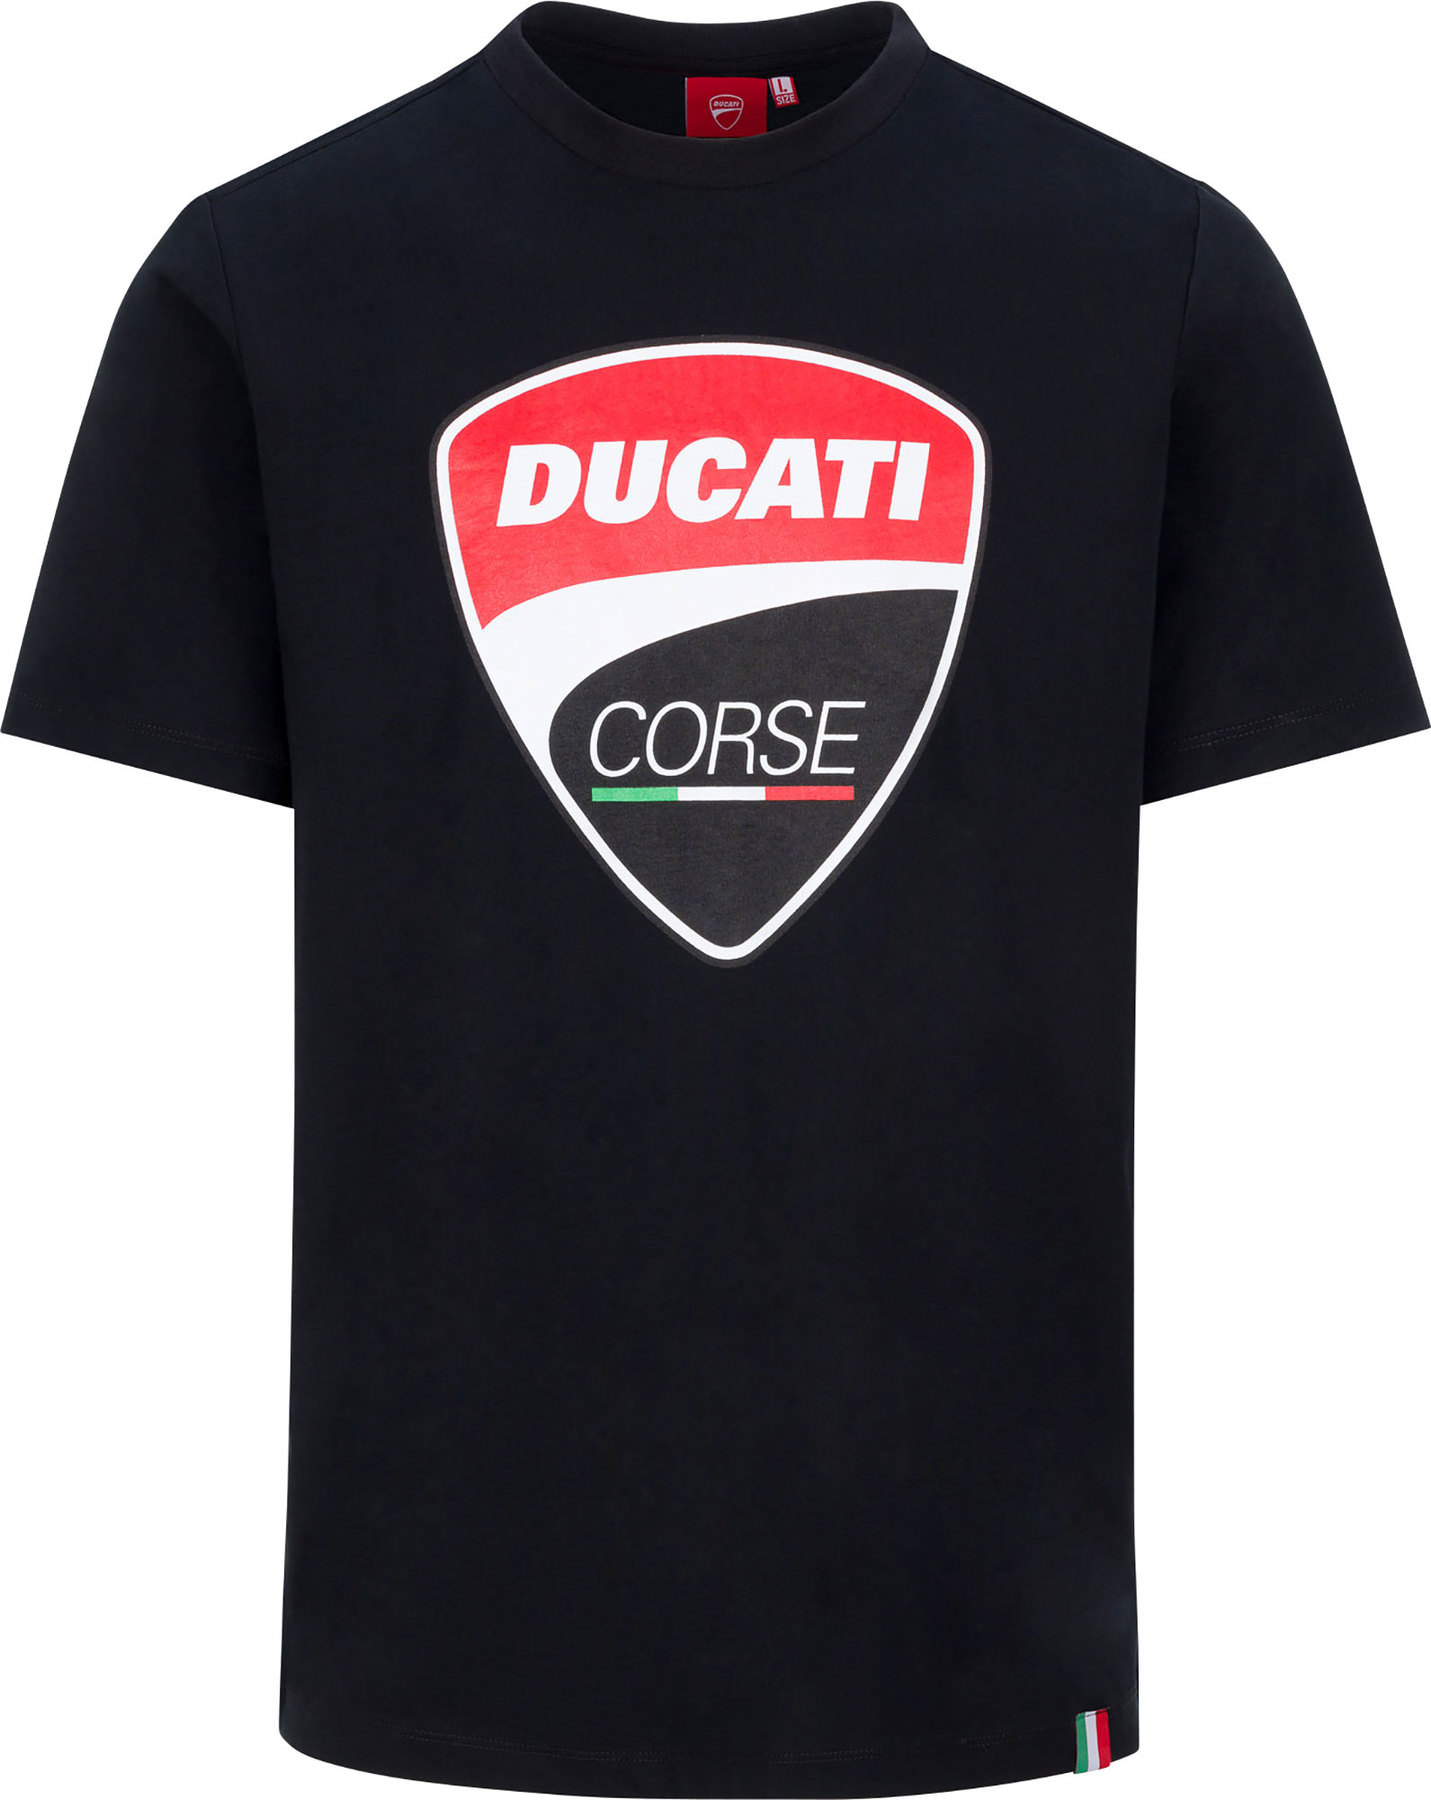 Buy Ducati Corse Big Logo T Shirt Louis Motorcycle Clothing And Technology